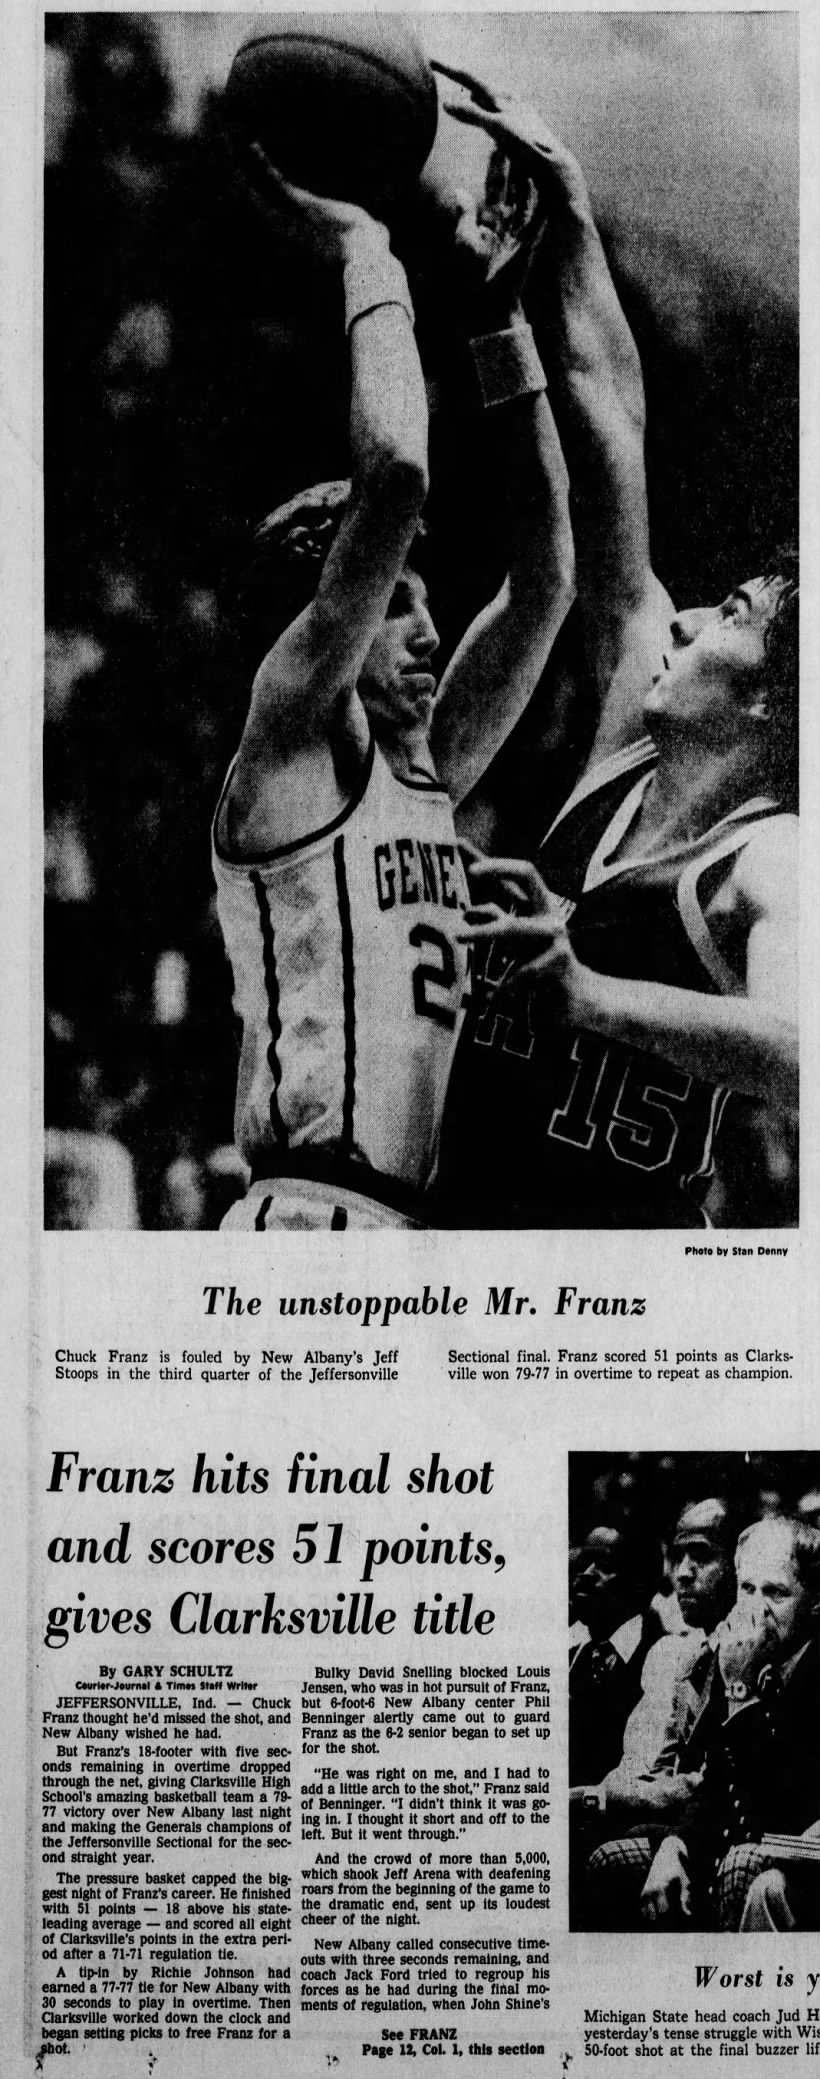 Clarksville and Franz win sectional over New Albany 1979